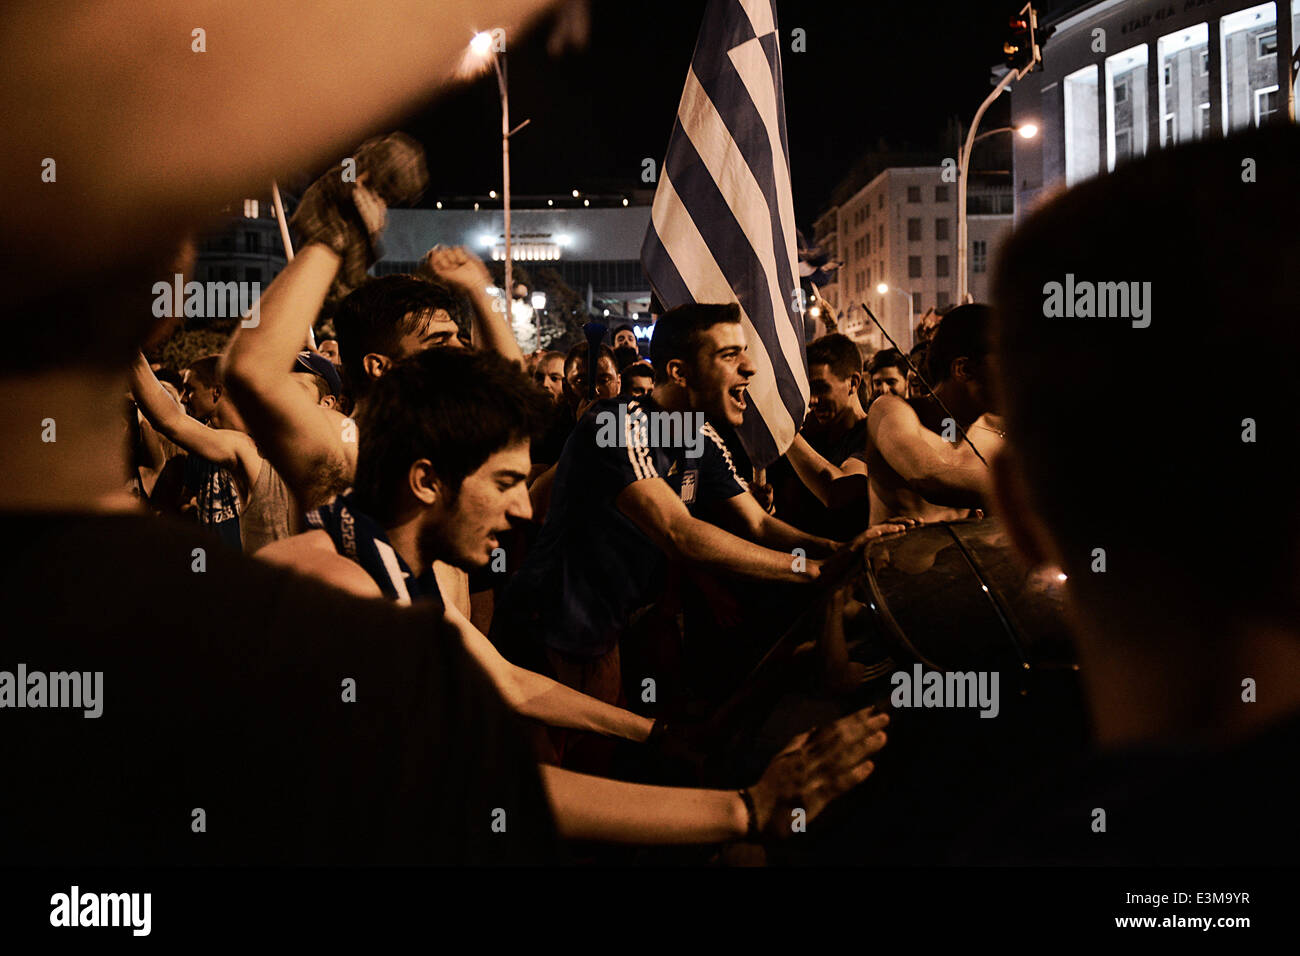 Thessaloniki, Greece. 25th June, 2014. Thousands of Greeks gathered under the White tower in Thessaloniki to celebrate the qualification of the Greek team to next phase of World Cup 2014 after the victory against the Cote D'Ivoire. Credit:  Giannis Papanikos/NurPhoto/ZUMAPRESS.com/Alamy Live News Stock Photo